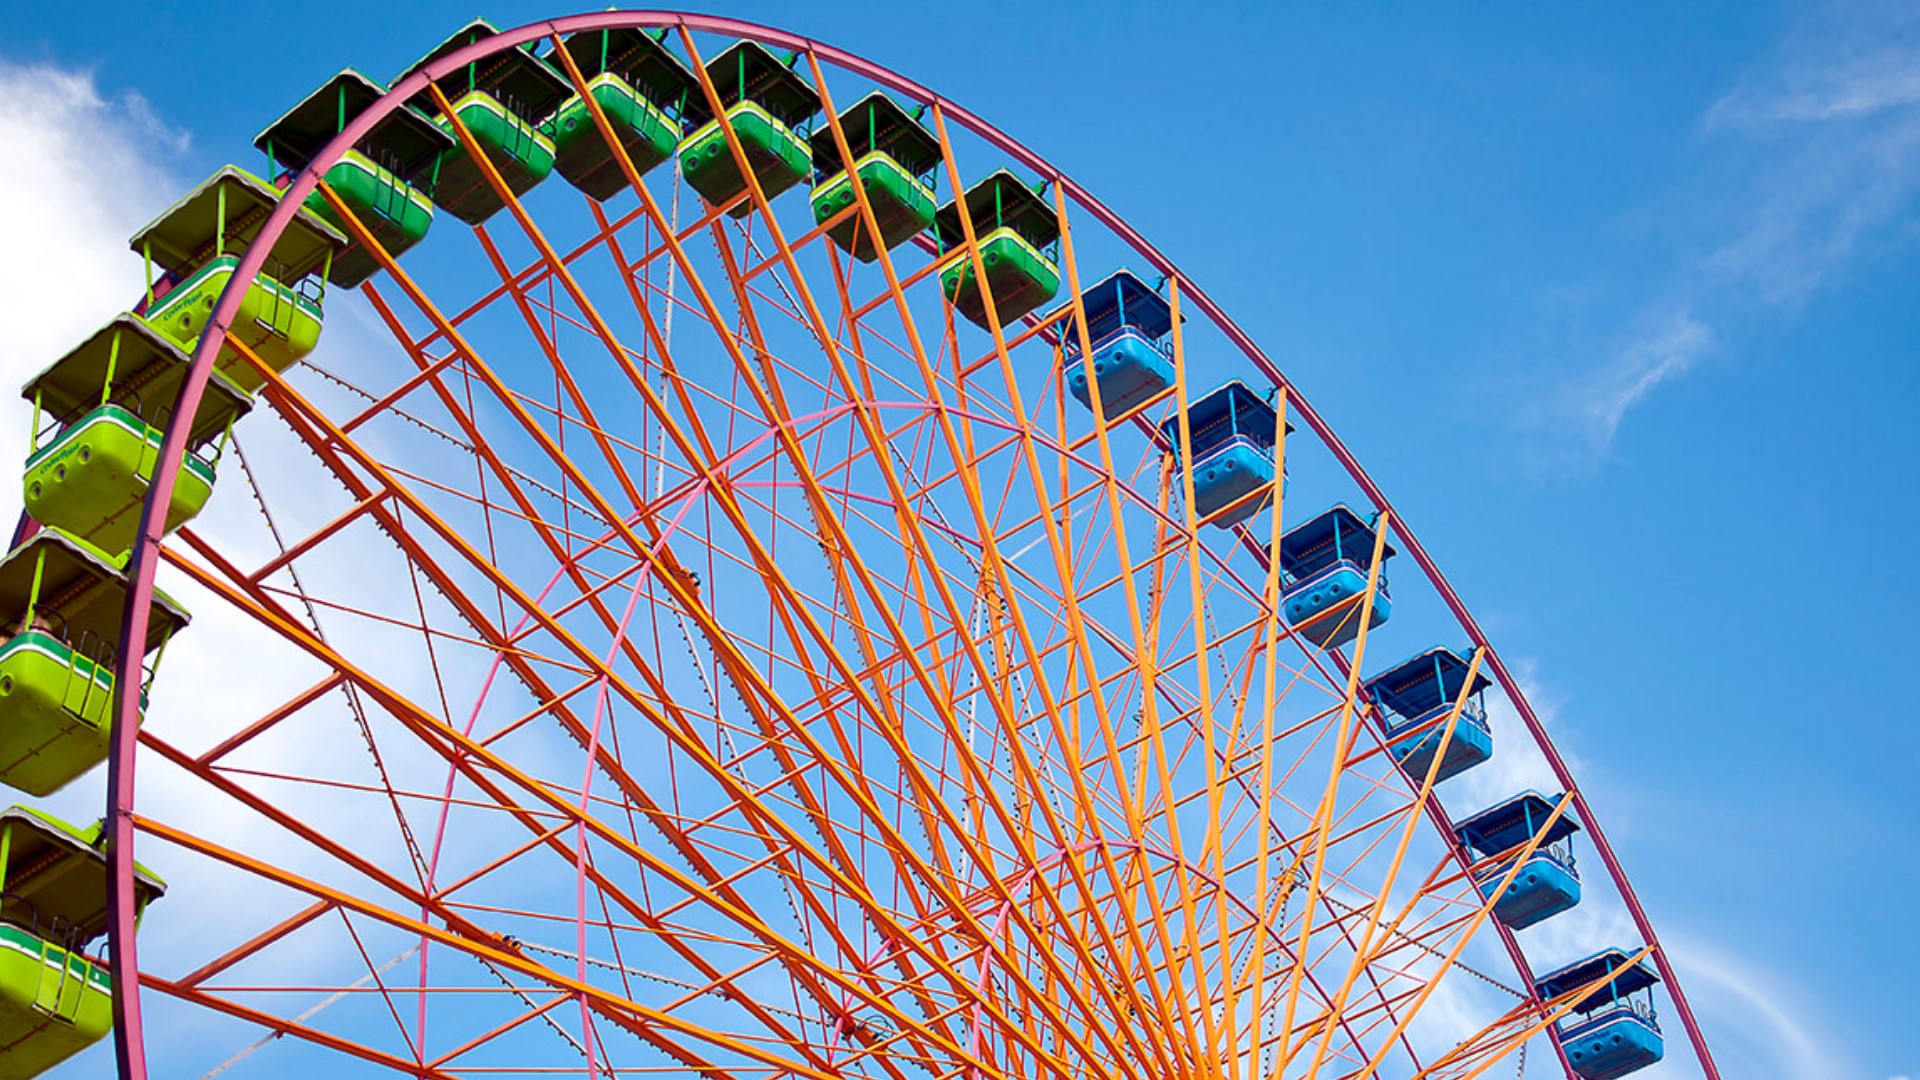 Four witnesses told Sandusky police that they saw a couple engaged in sexual intercourse on a Cedar Point ride.